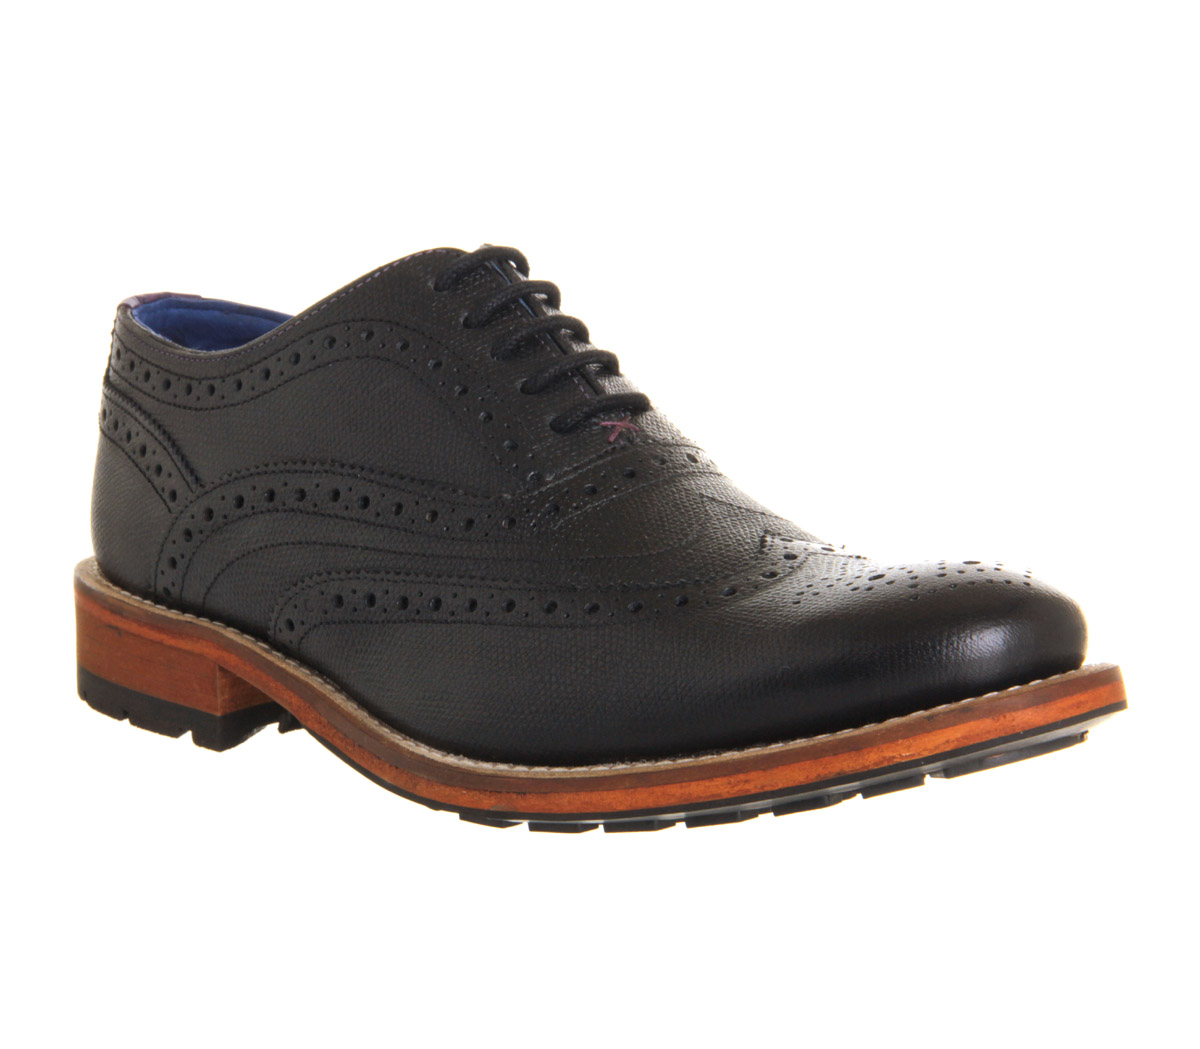 ted baker black brogue boots